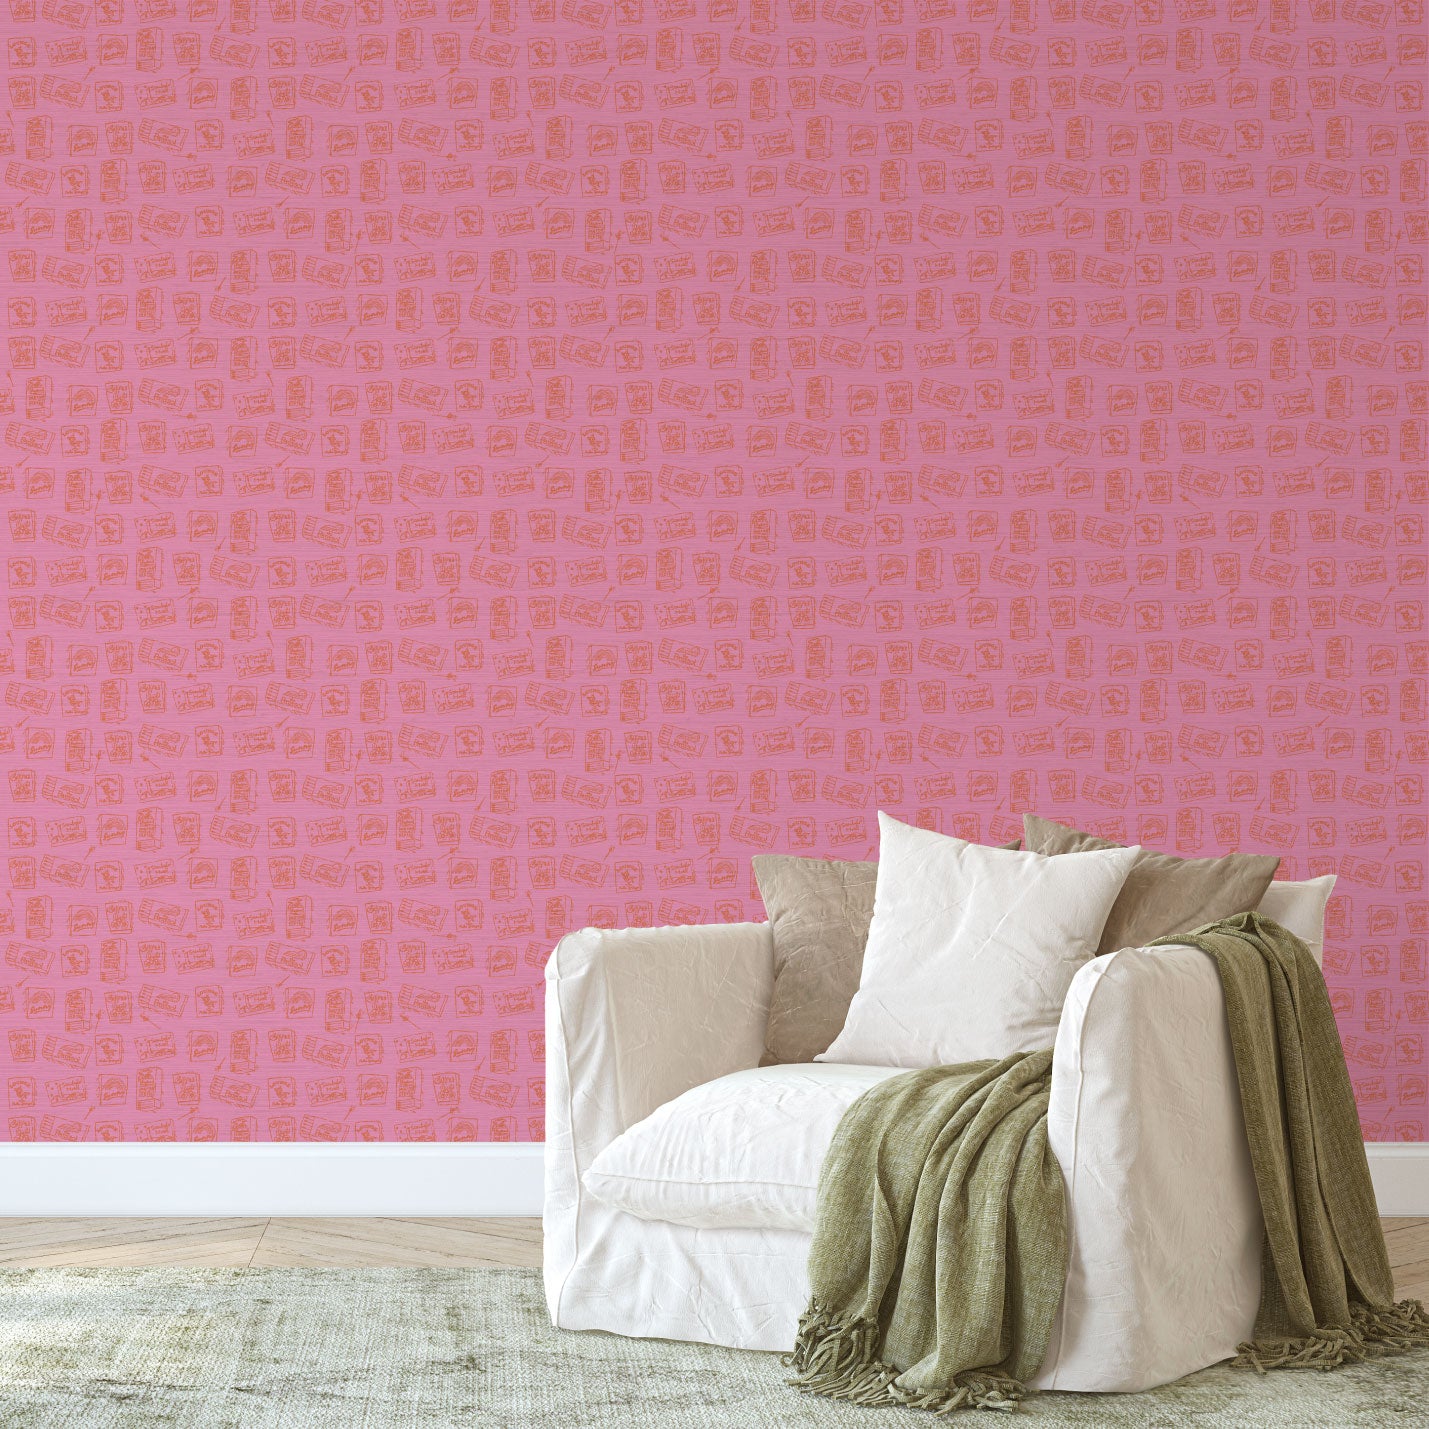 grasscloth wallpaper natural textured eco-friendly non-toxic high quality sustainable interior design modern funny bar small space matches matchbook match lounge watering hole pink red living room